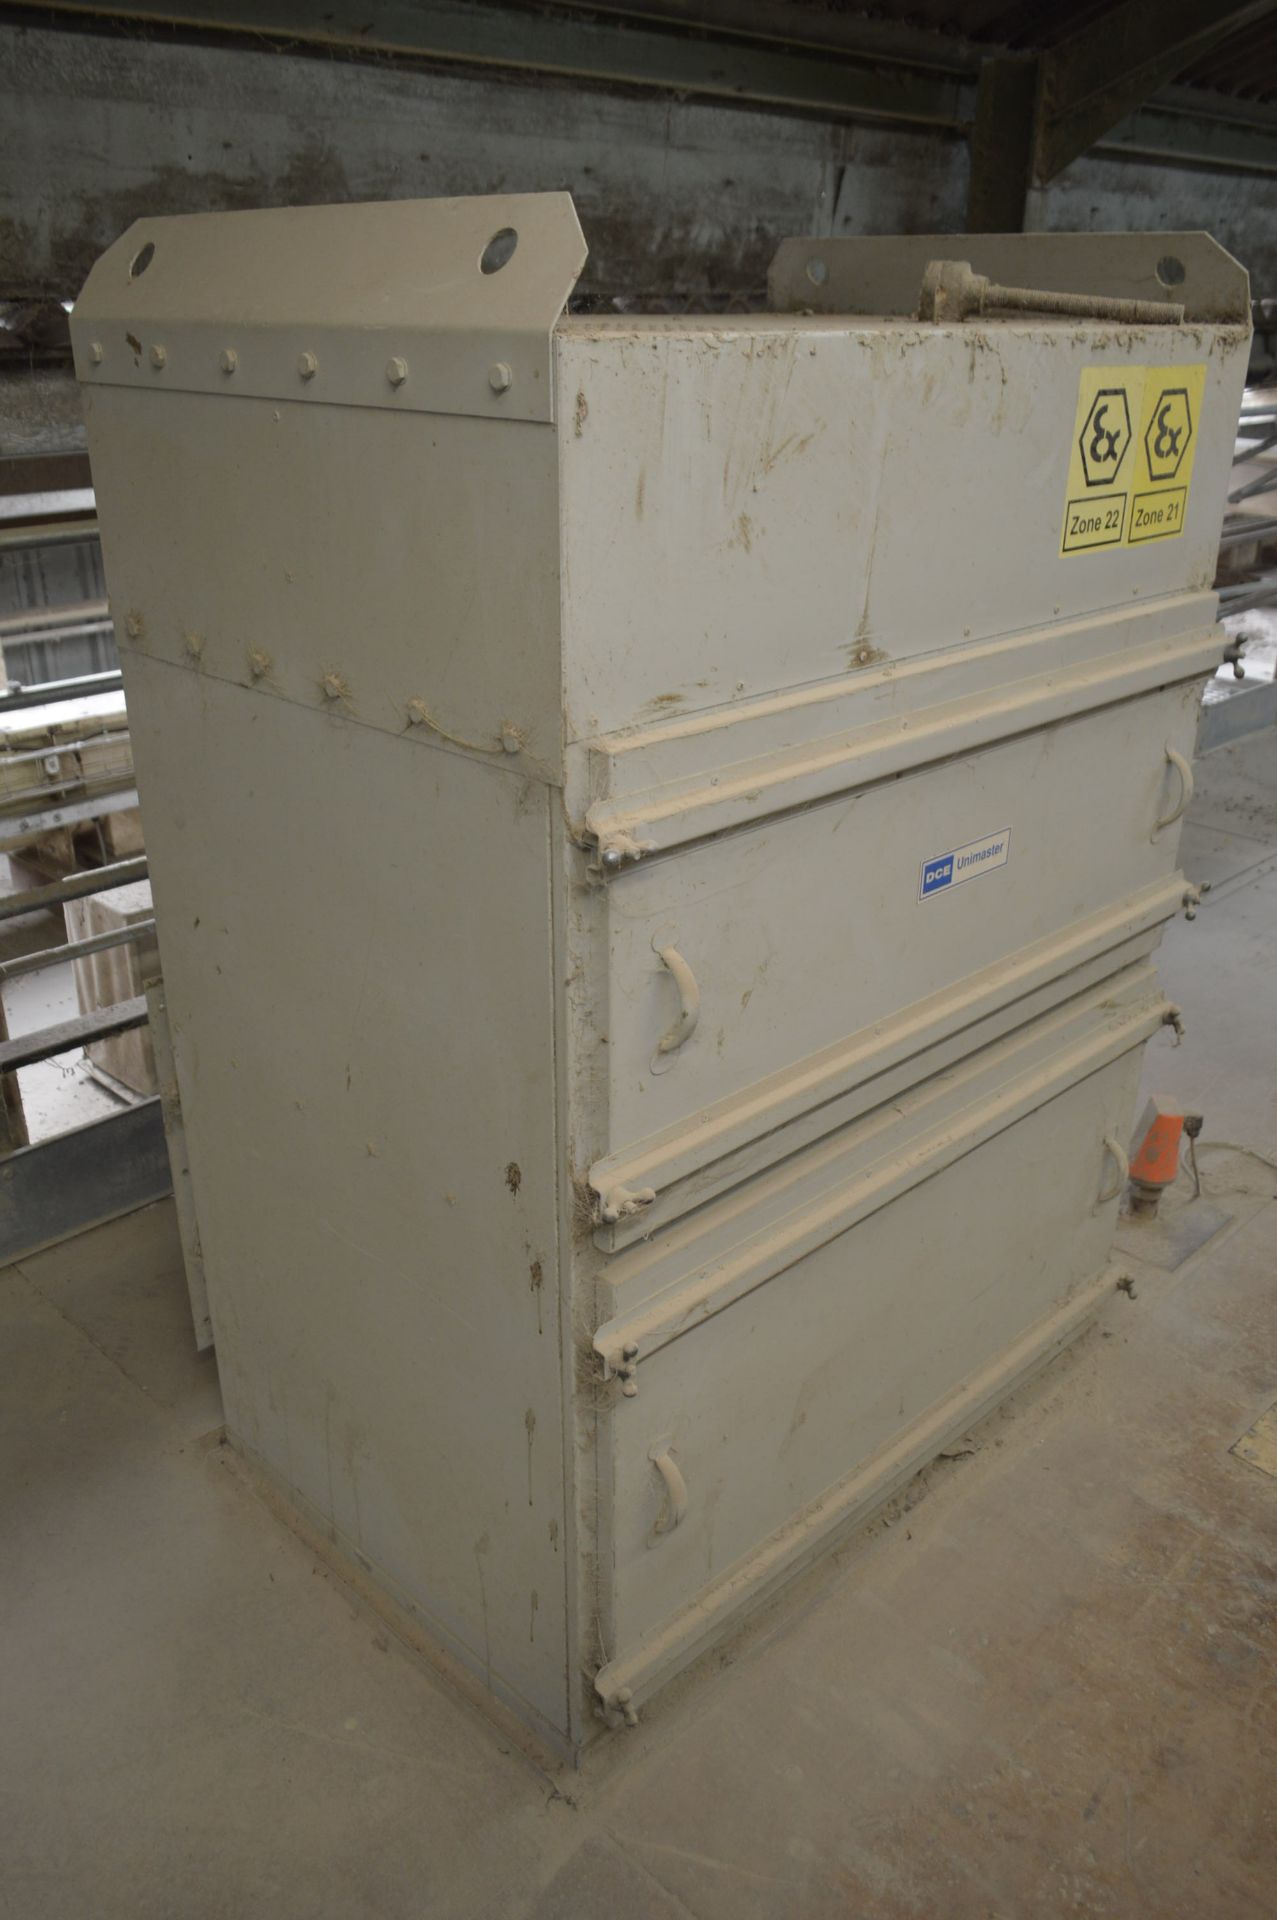 DCE Unimaster 250HK3 Dust Venting Unit, serial no. 675073, year of manufacture 2000 - Image 2 of 4